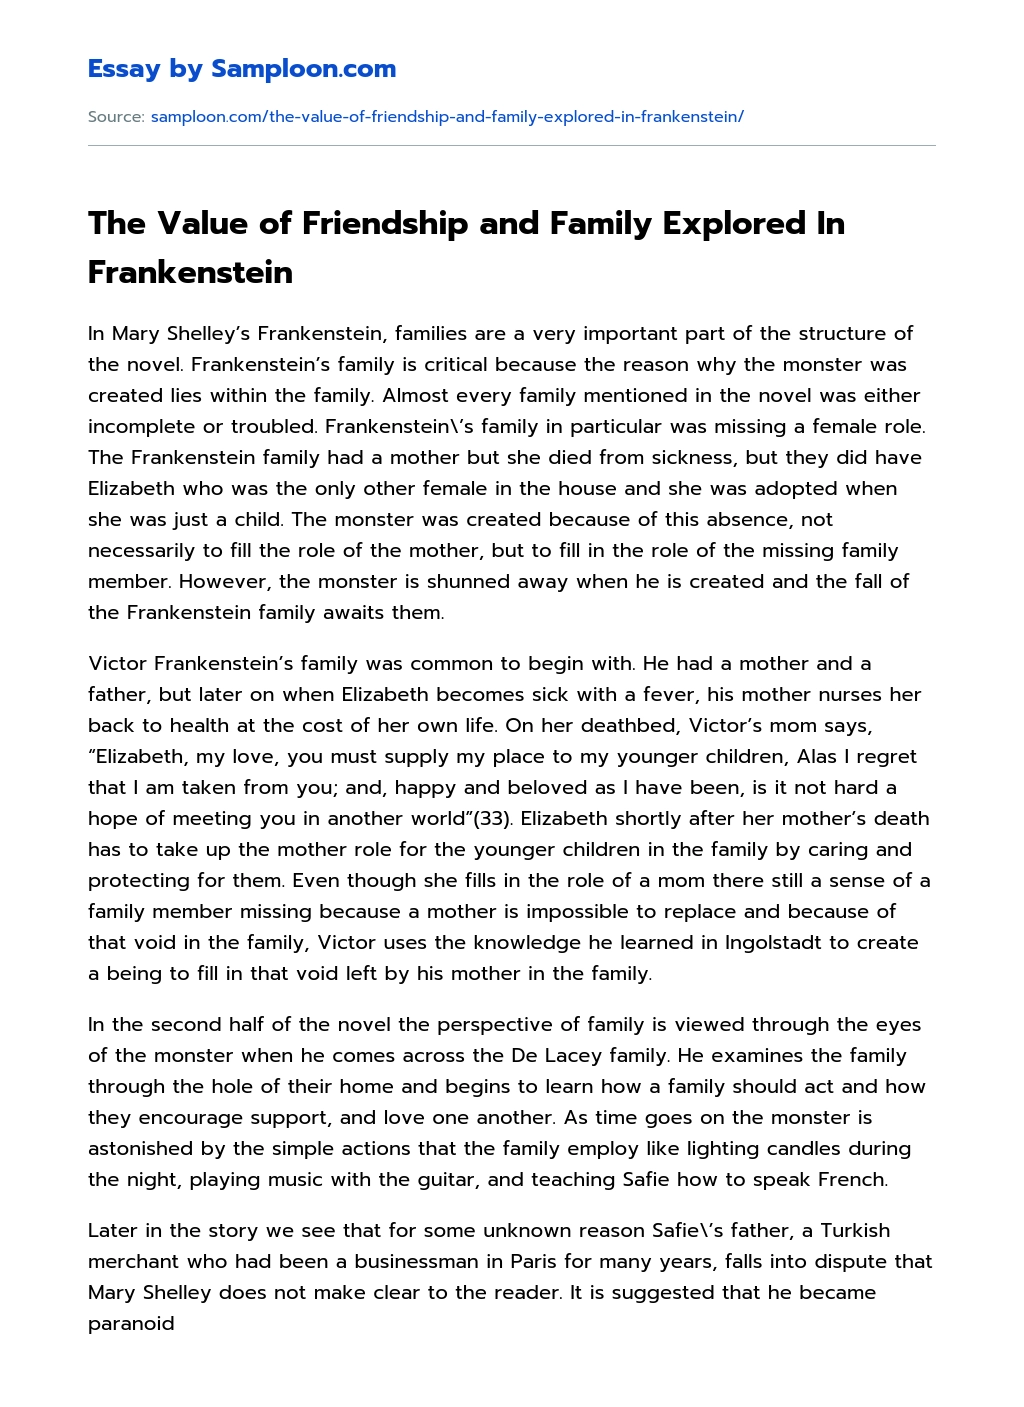 The Value of Friendship and Family Explored In Frankenstein essay